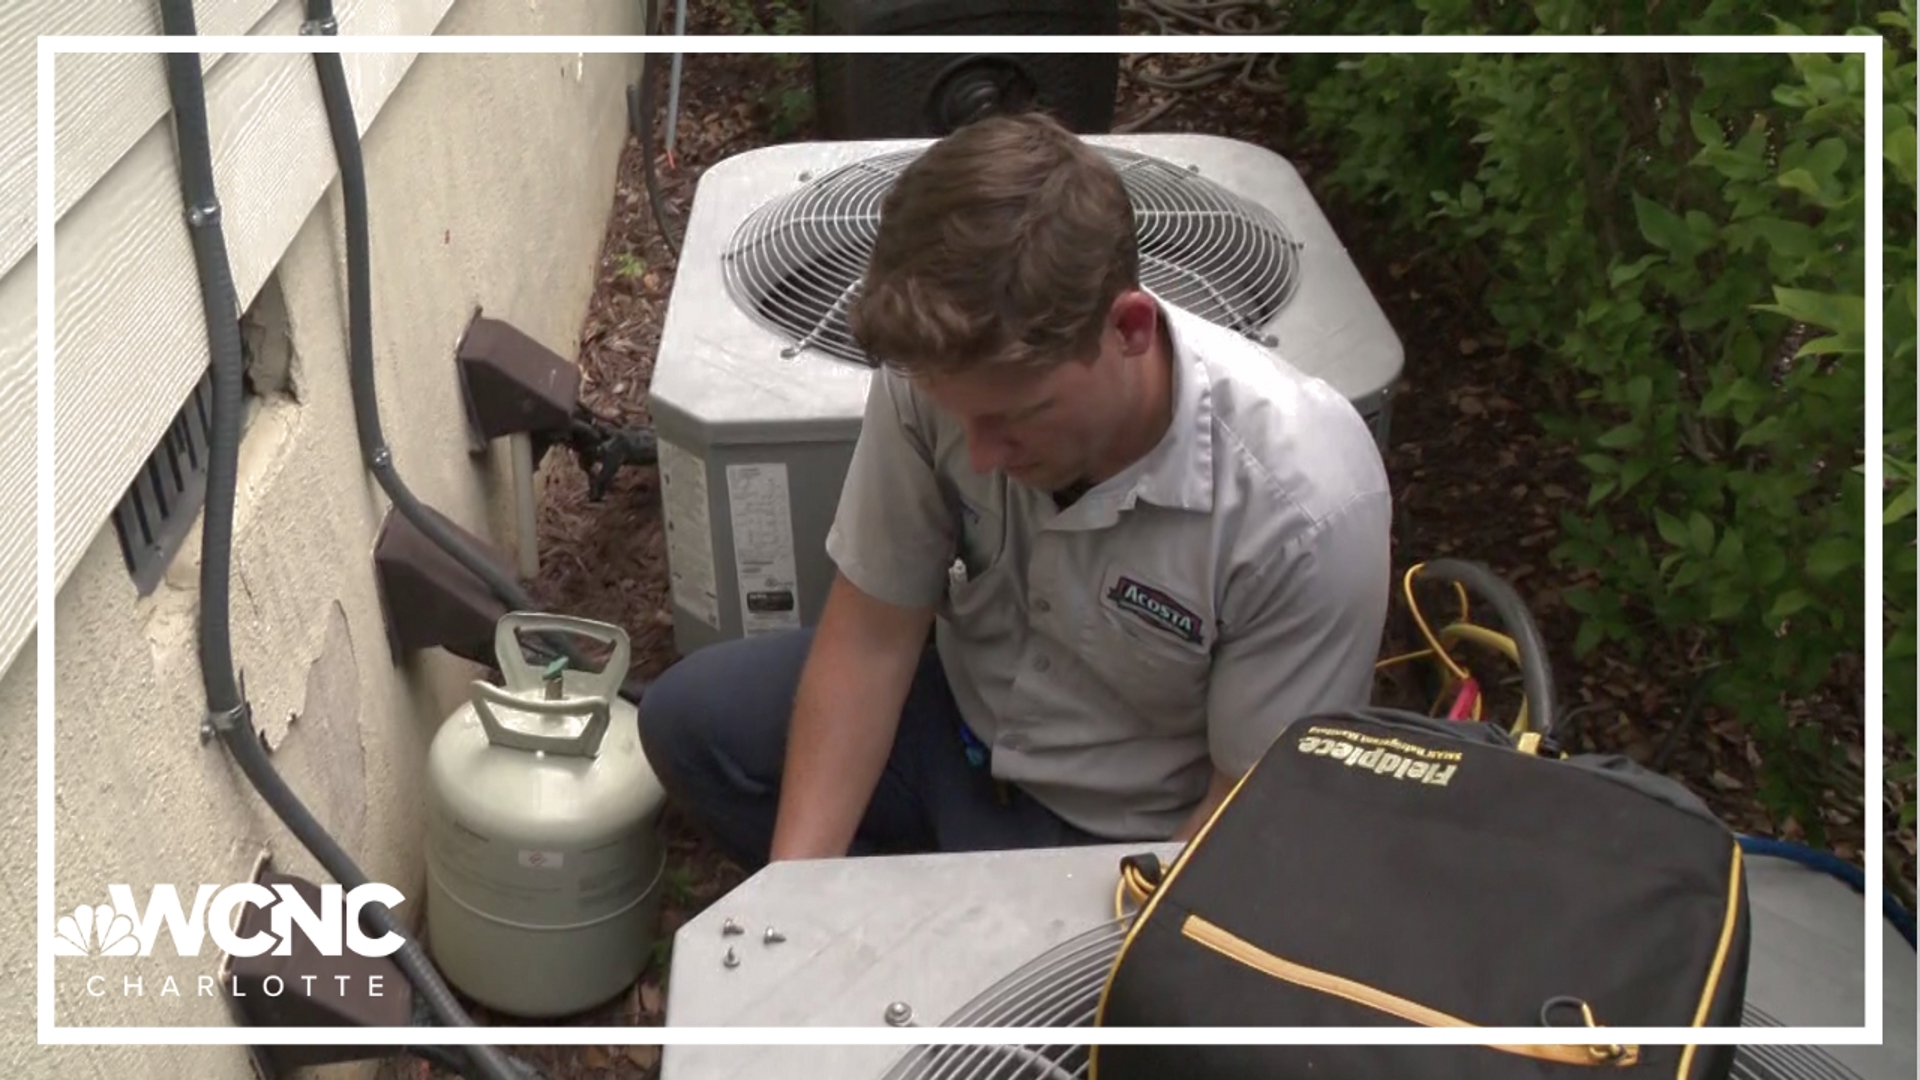 Local HVAC companies say this extreme heat is putting AC systems to the test.